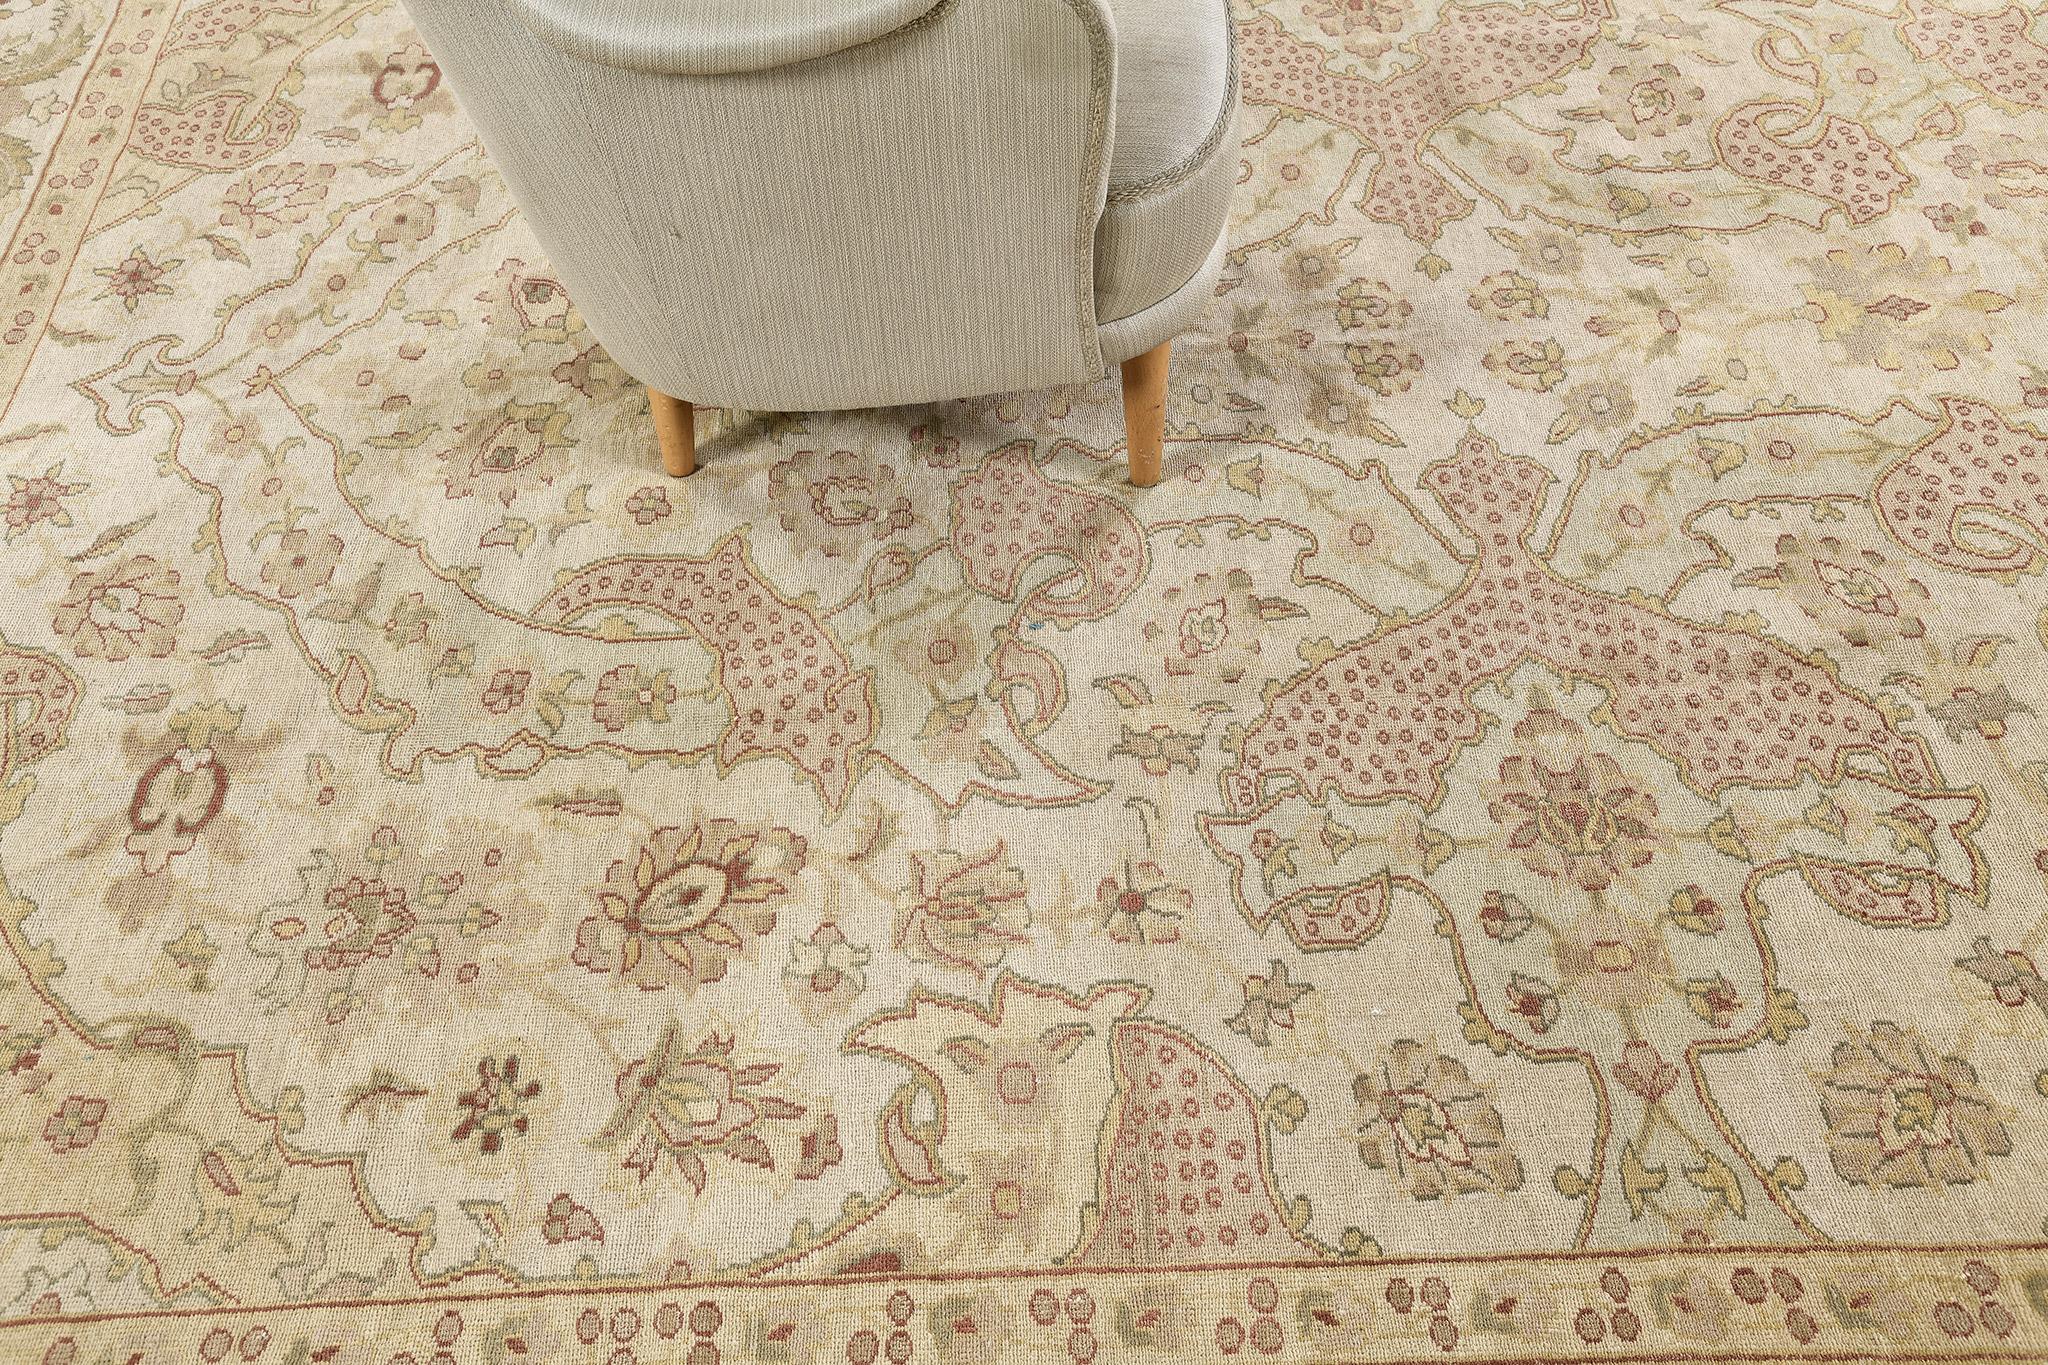 Thinking of European or Western theme with a touch of luxury vibe? This rug will be perfect for your interior! This Amritsar Design revival rug has its unique double weft and asymmetrical knots that still in fashion. Your guests will surely in awe